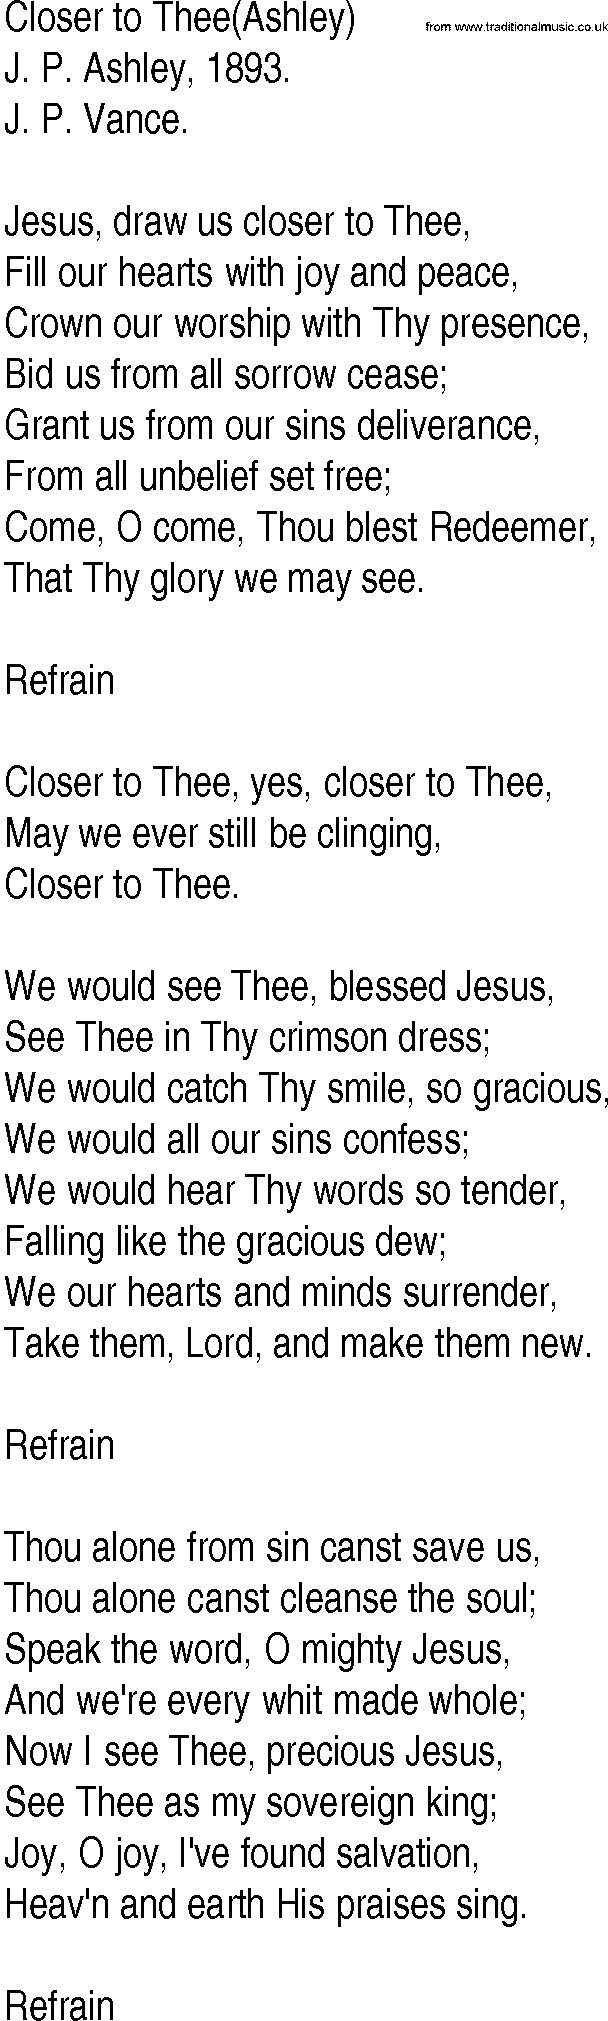 Hymn and Gospel Song: Closer to Thee(Ashley) by J P Ashley lyrics